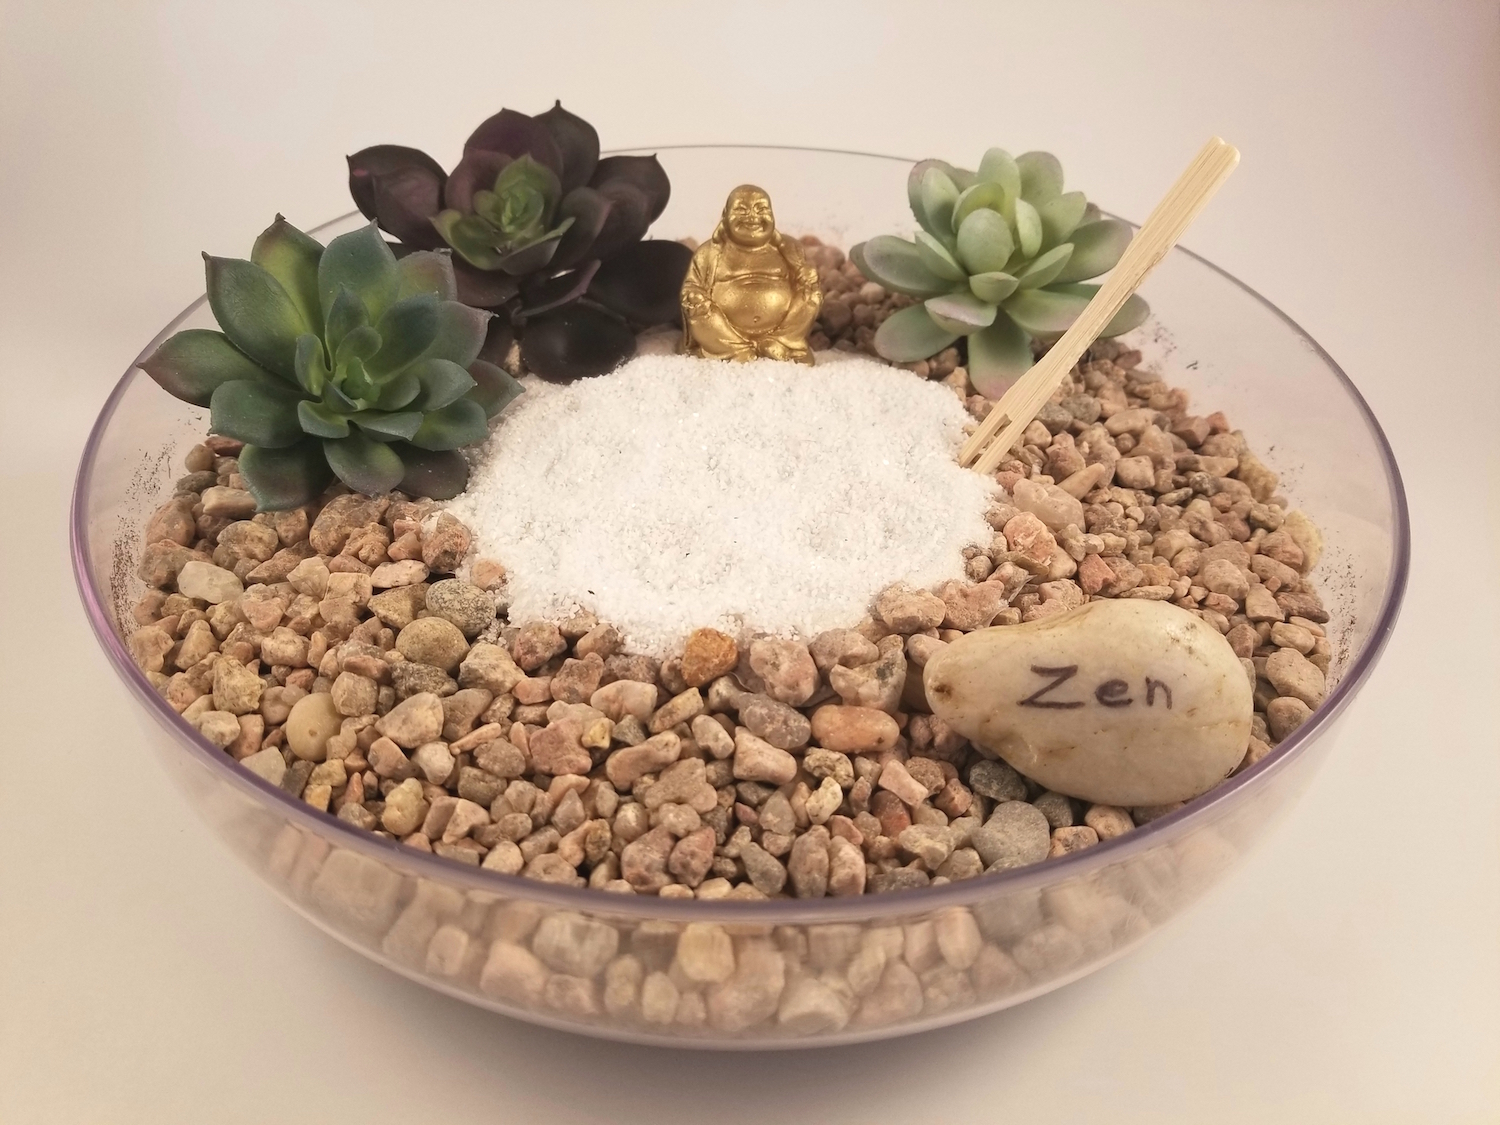 A Buddha Zen Garden in 9 Faux Glass plant nite project by Yaymaker